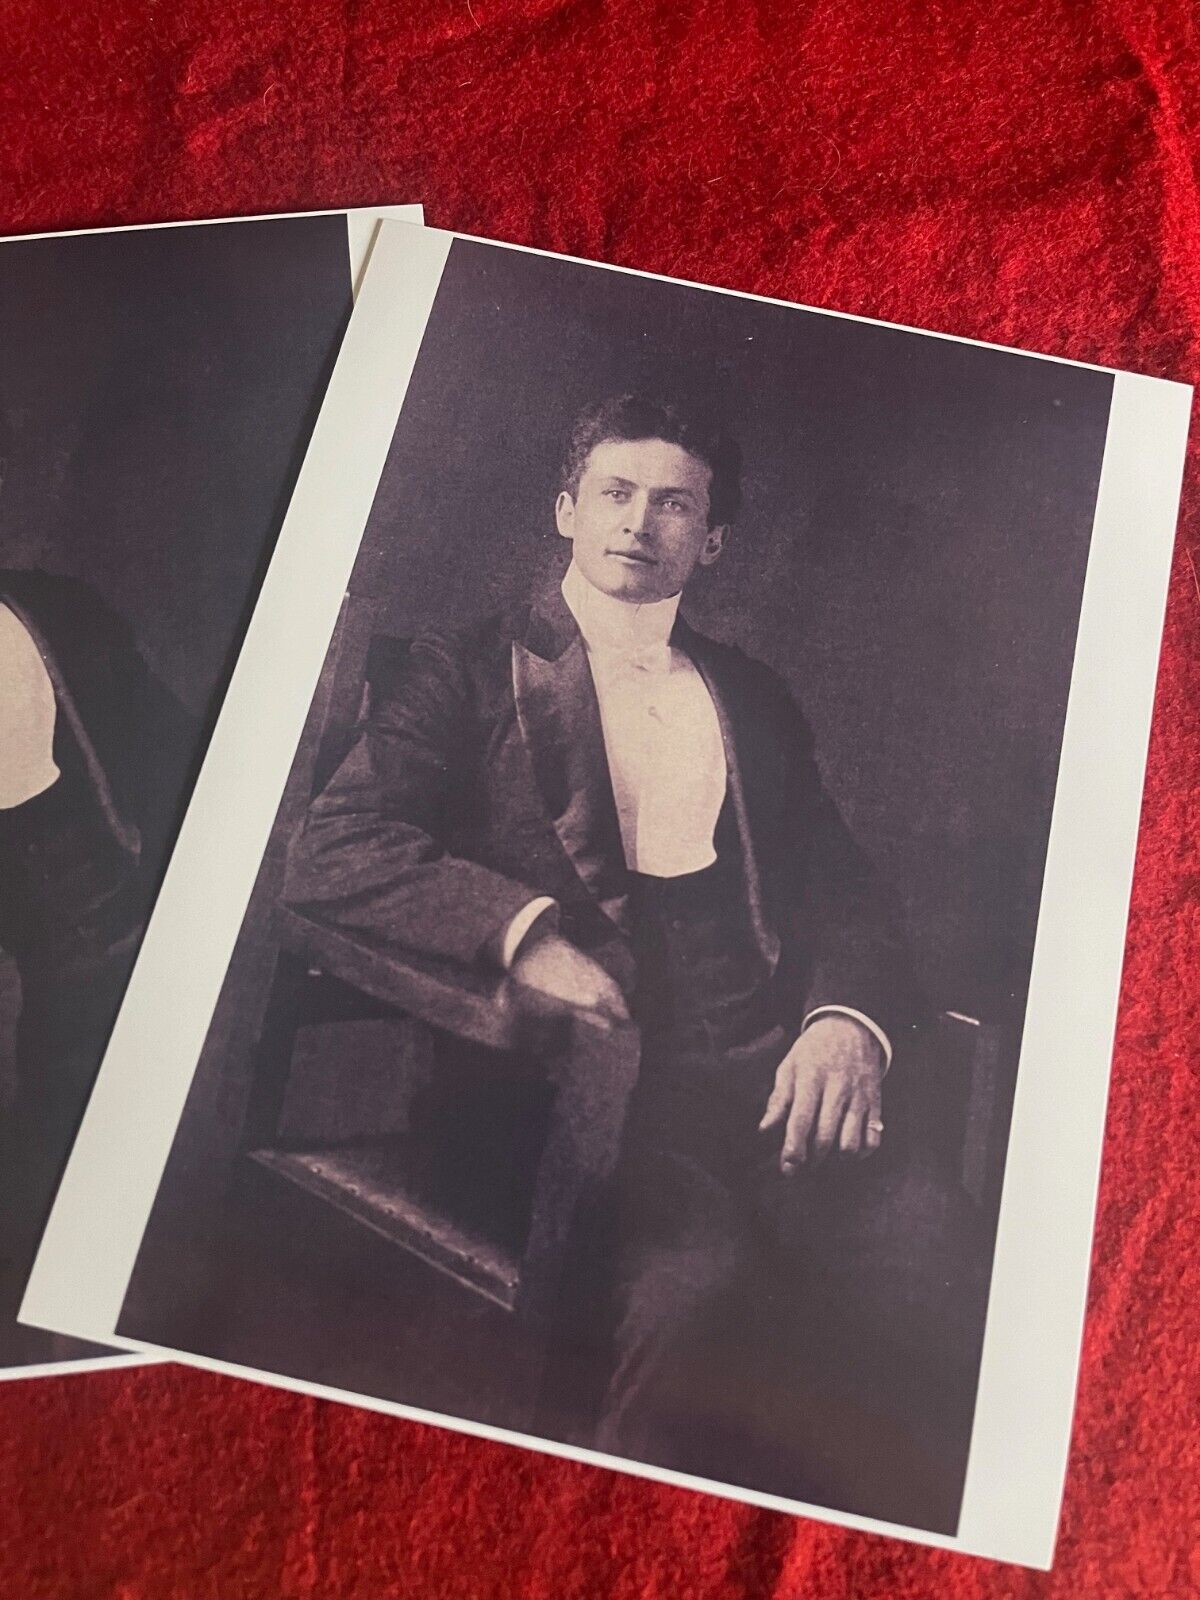 Harry Houdini, Reprint Photo, looking proud & Confident, like a King on a throne